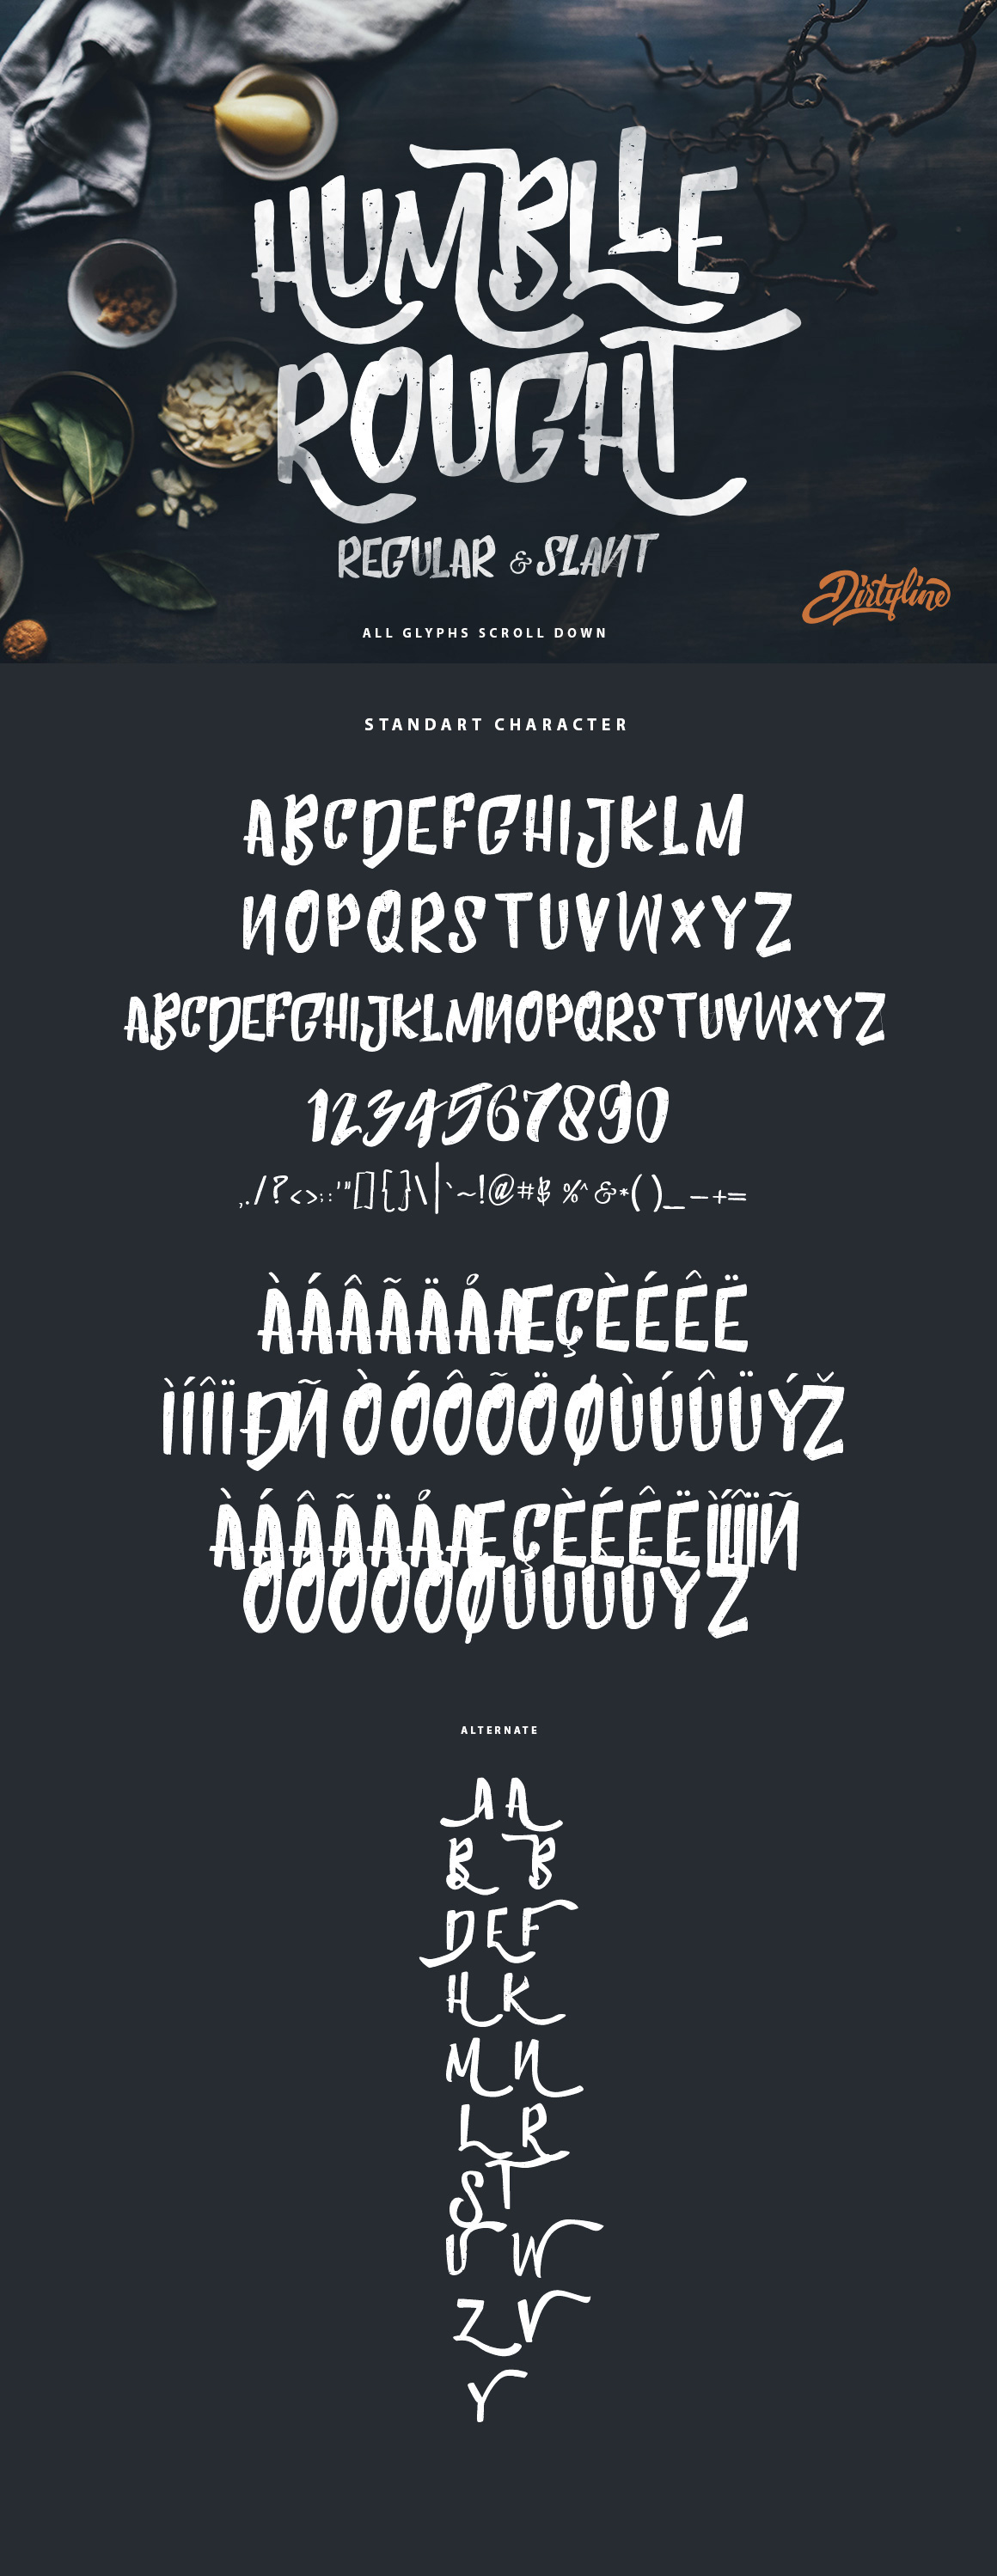 Humblle Rought Free Font on Behance